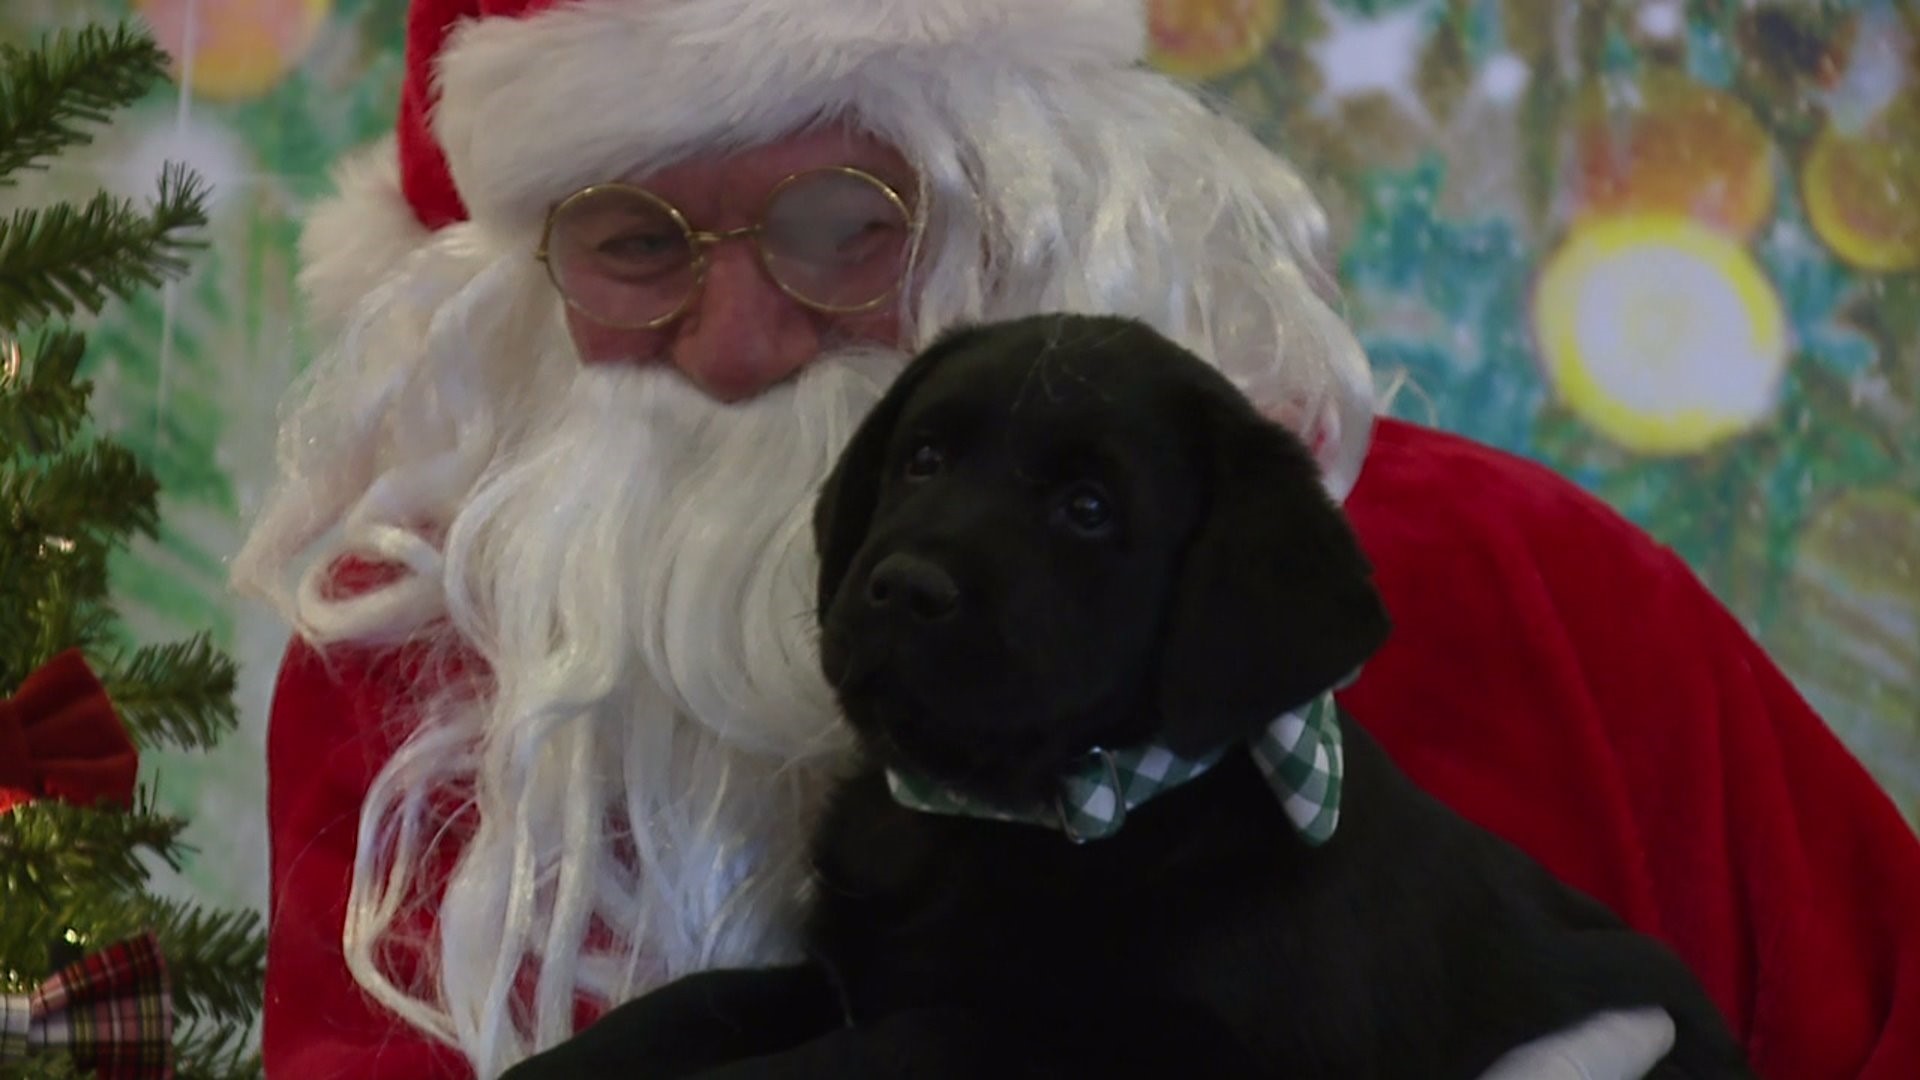 Pets pose for photos with Santa at a Very Hairy Christmas